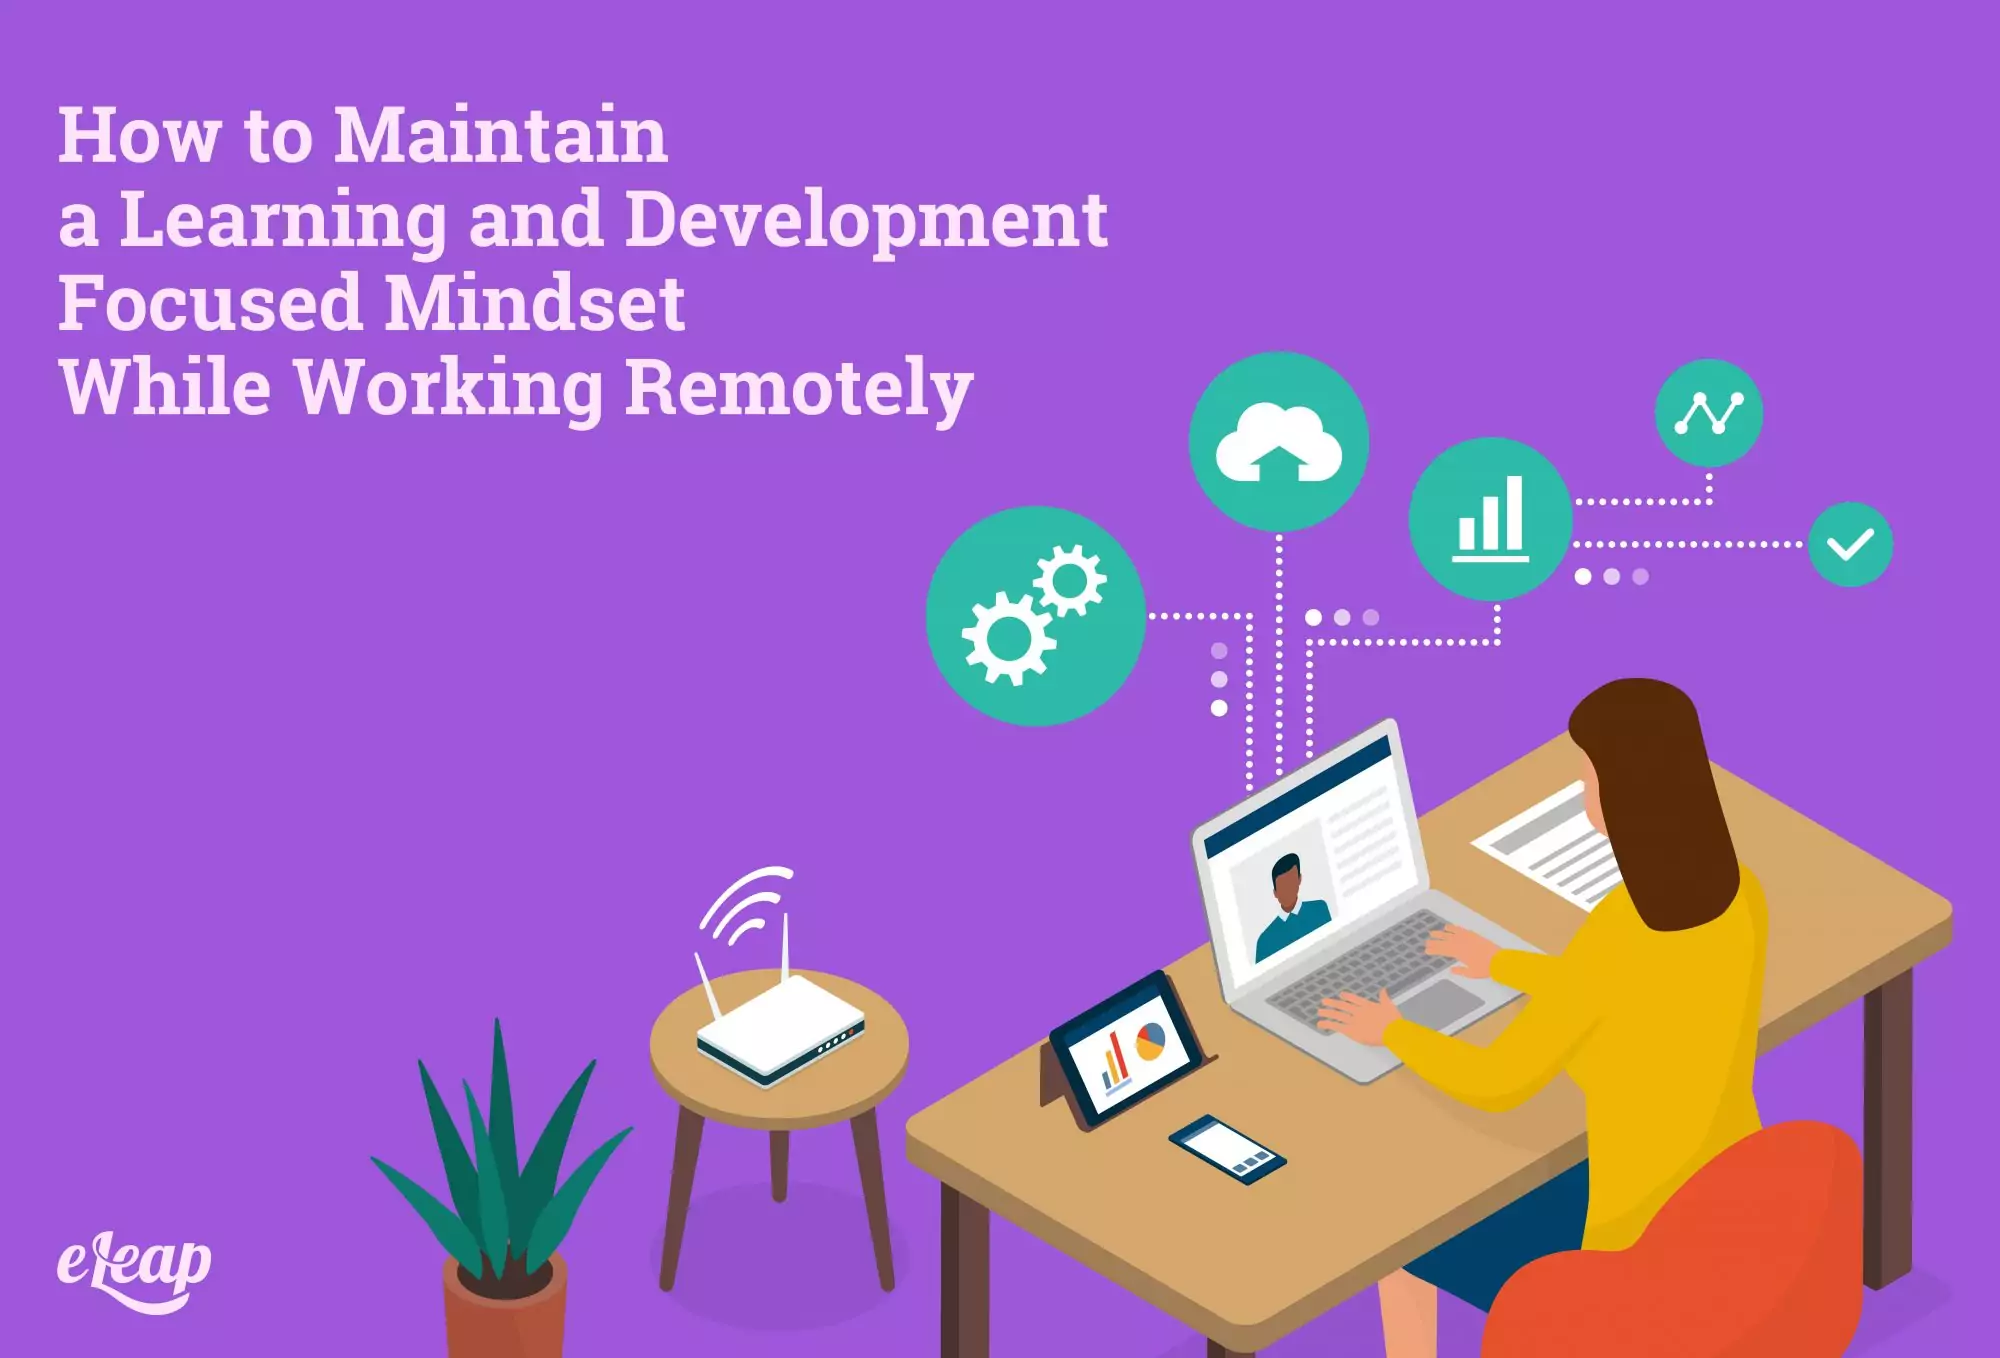 How to Maintain a Learning and Development Focused Mindset While Working Remotely